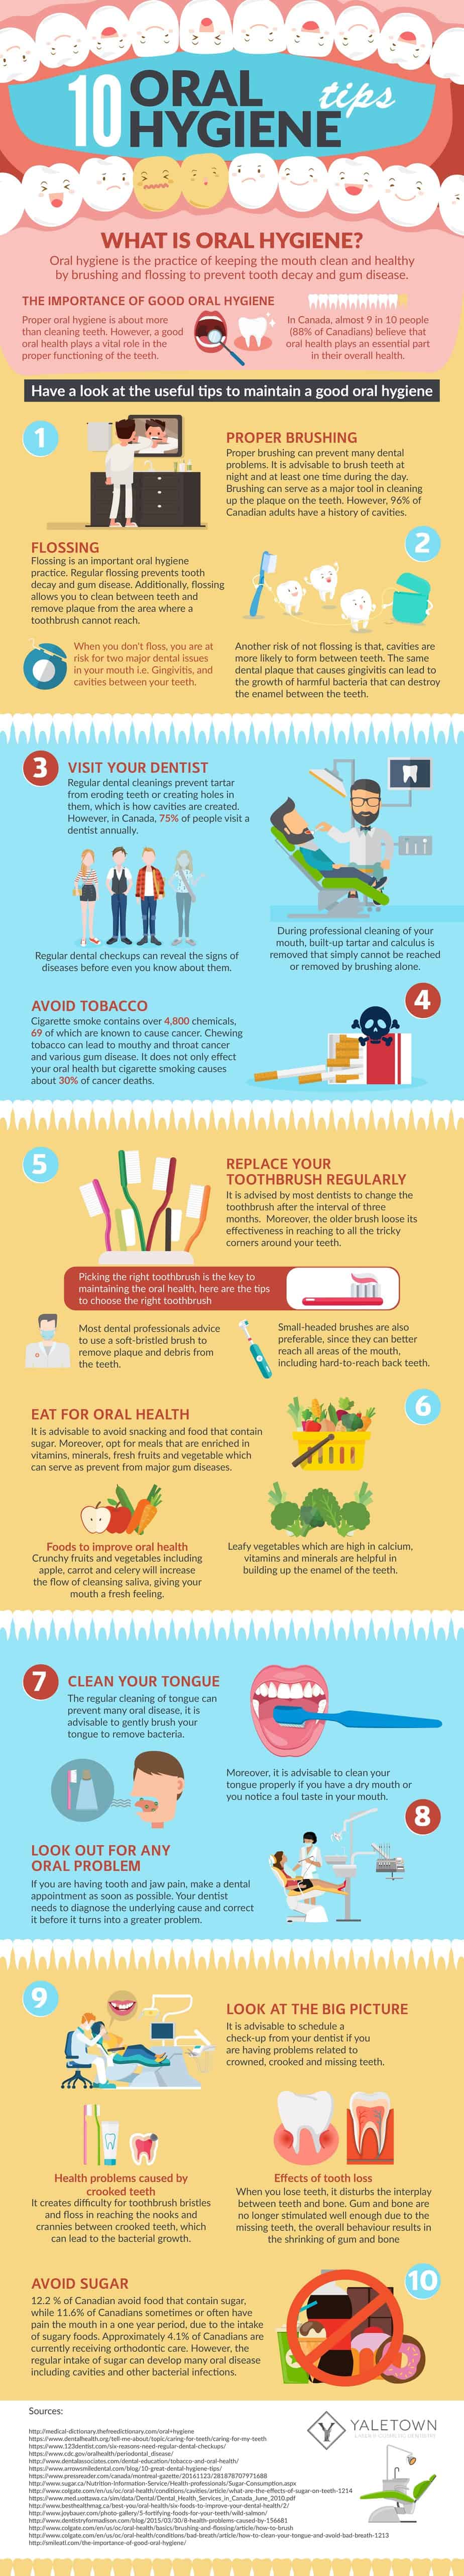 How To Create An Infographic On Oral Health